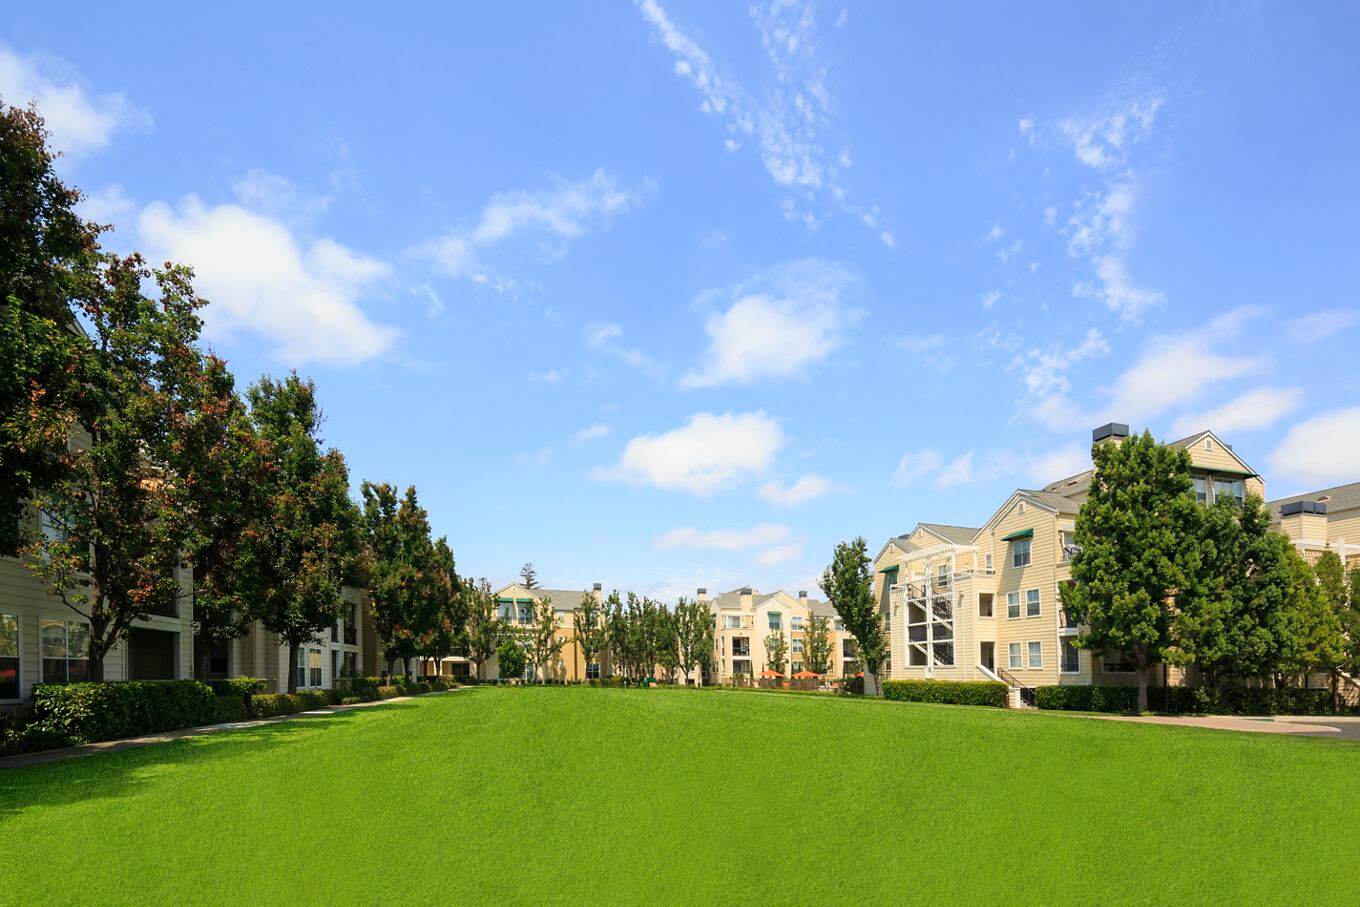 View of building exterior and lawn area at The Hamptons Apartment Homes in Cupertino, CA. 